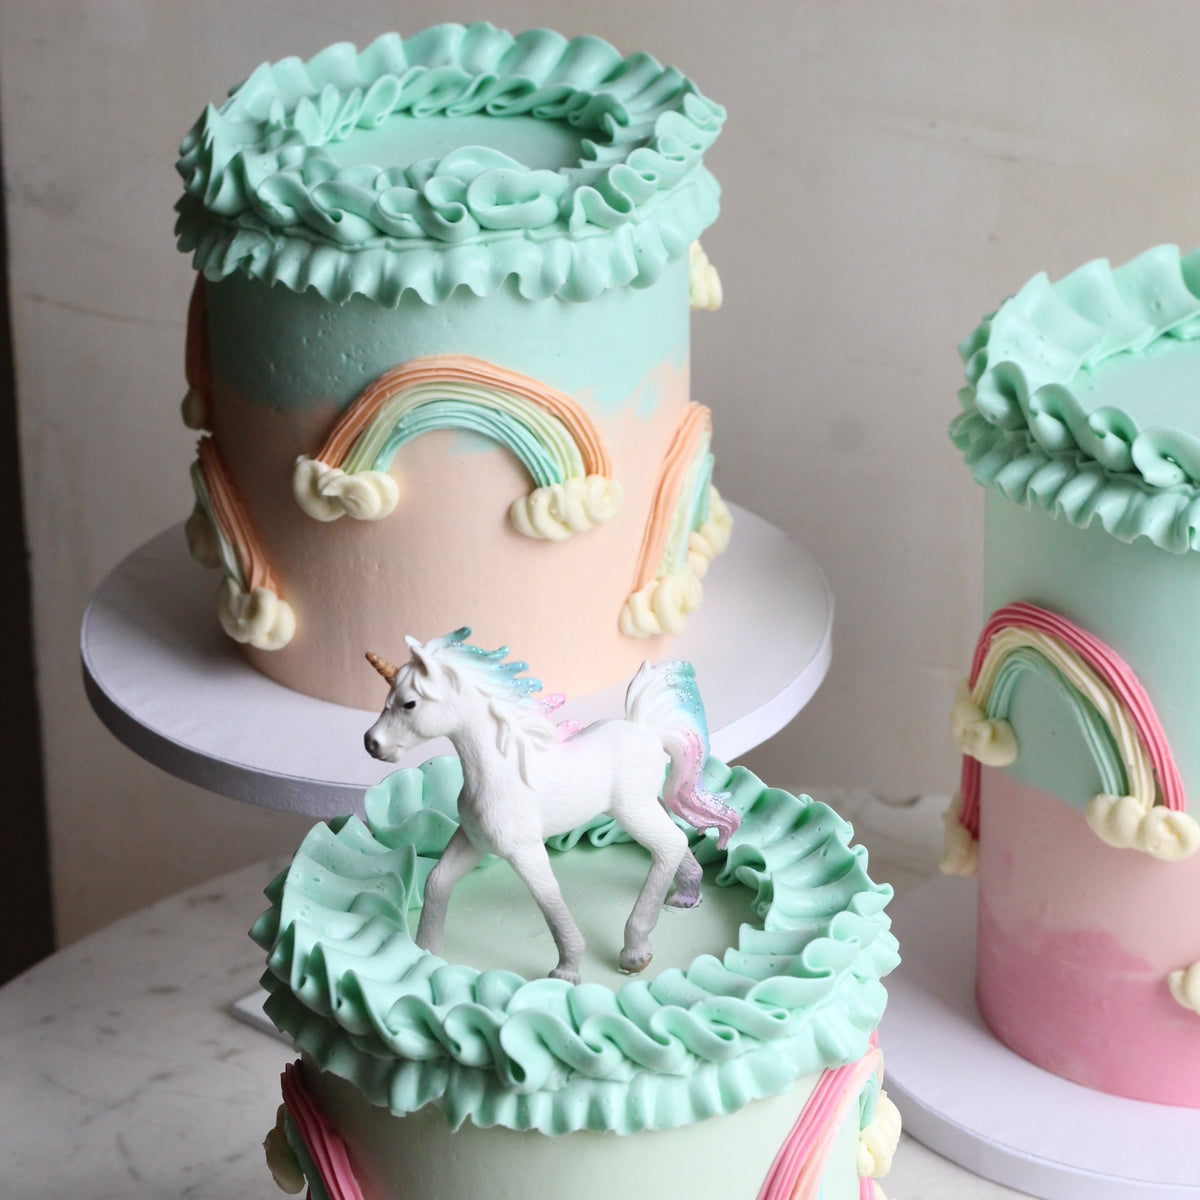 Our Rainbow Cake with peach &amp; mint ombre icing, 3D rainbows, creamy ruffles and unicorn topper!